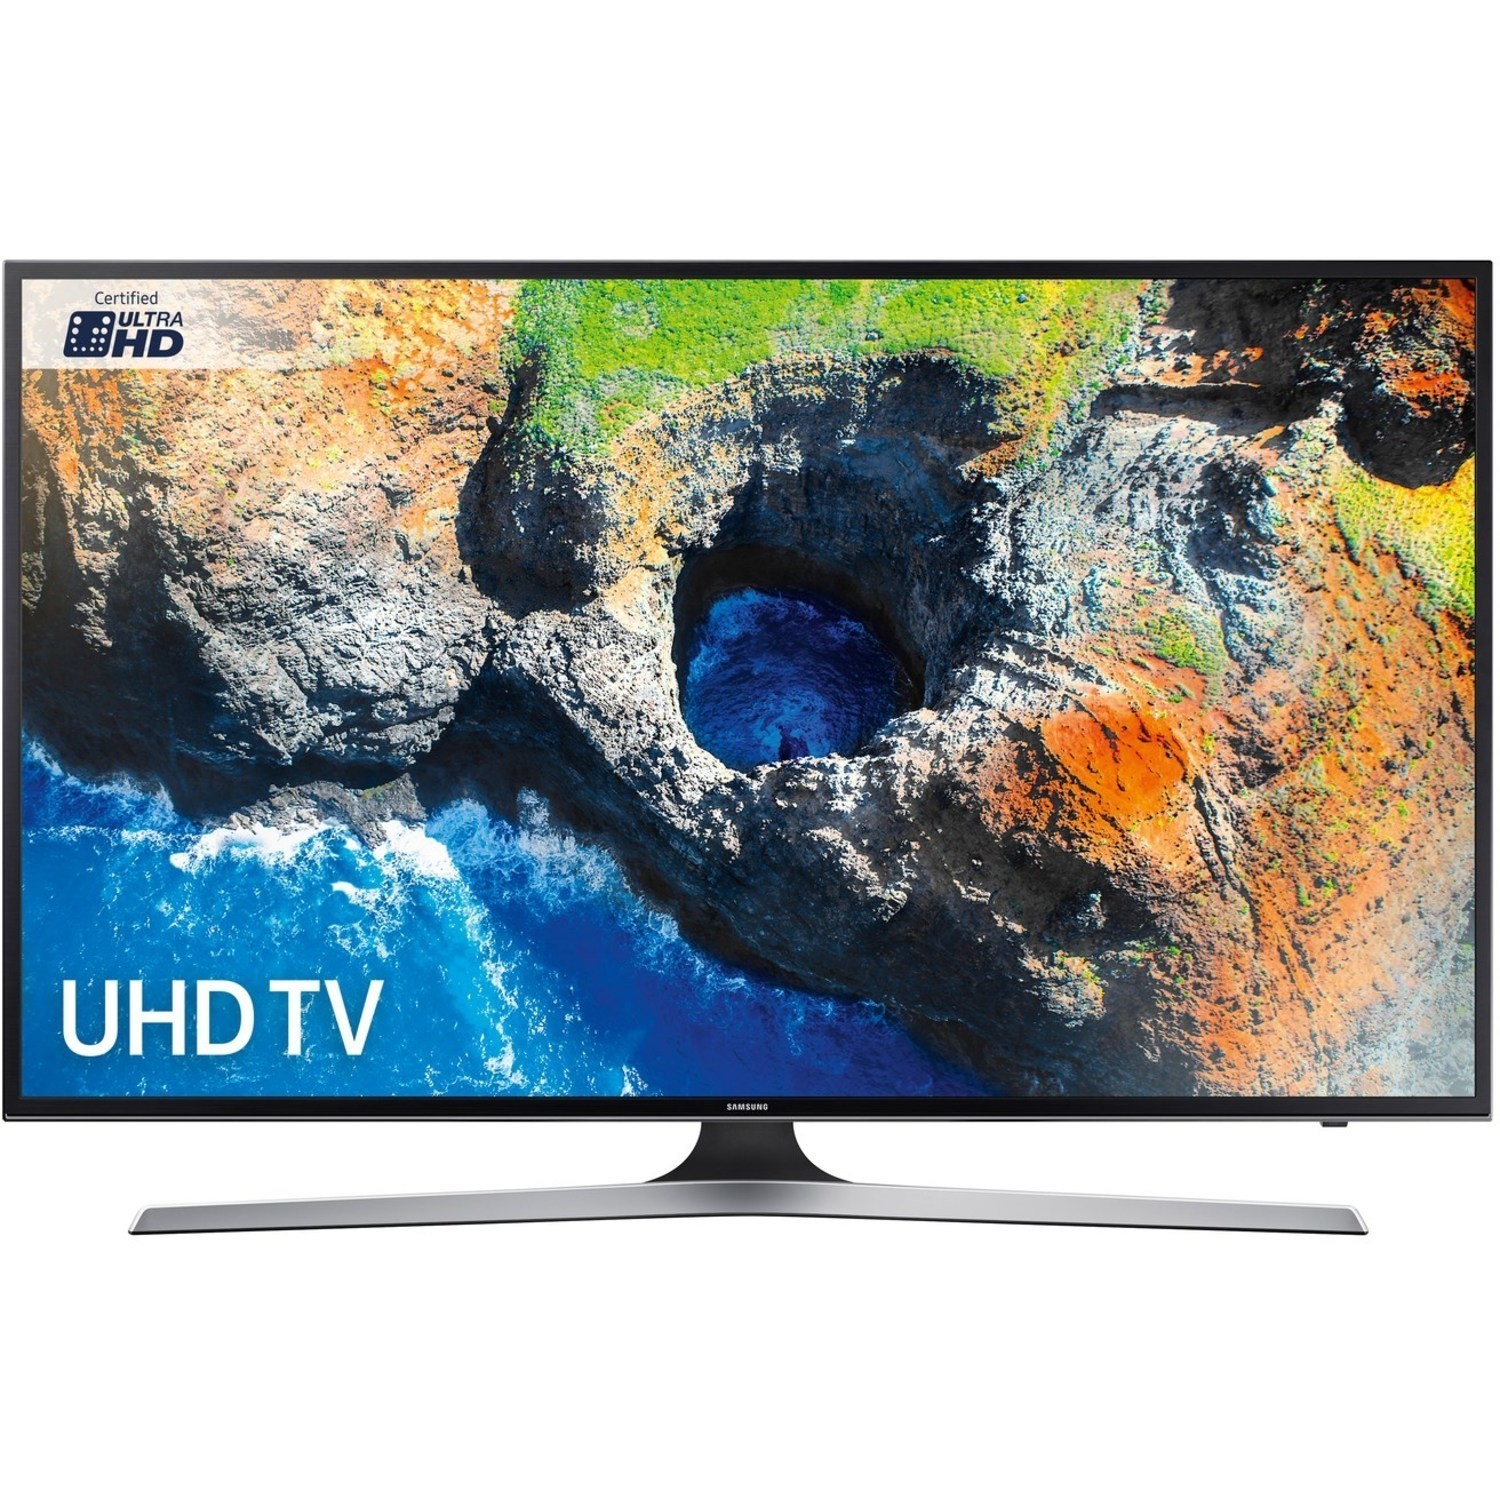 Android TV Philips LED 4K 50 HDR+